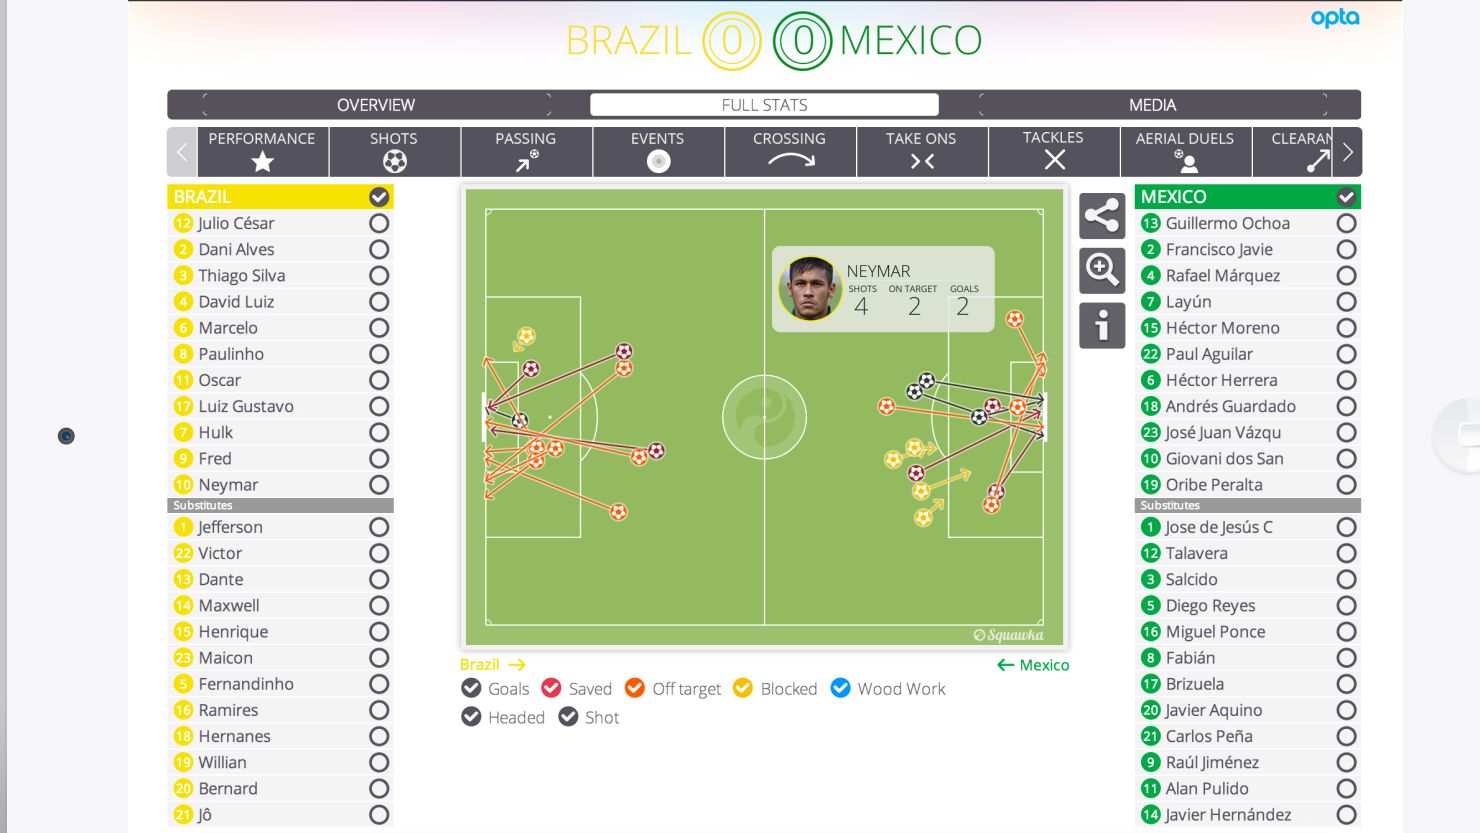 This Squawka Match Center image compares the shots of Brazil and Mexico in their opening FIFA World Cup games. The company is tipped as a start-up to watch.